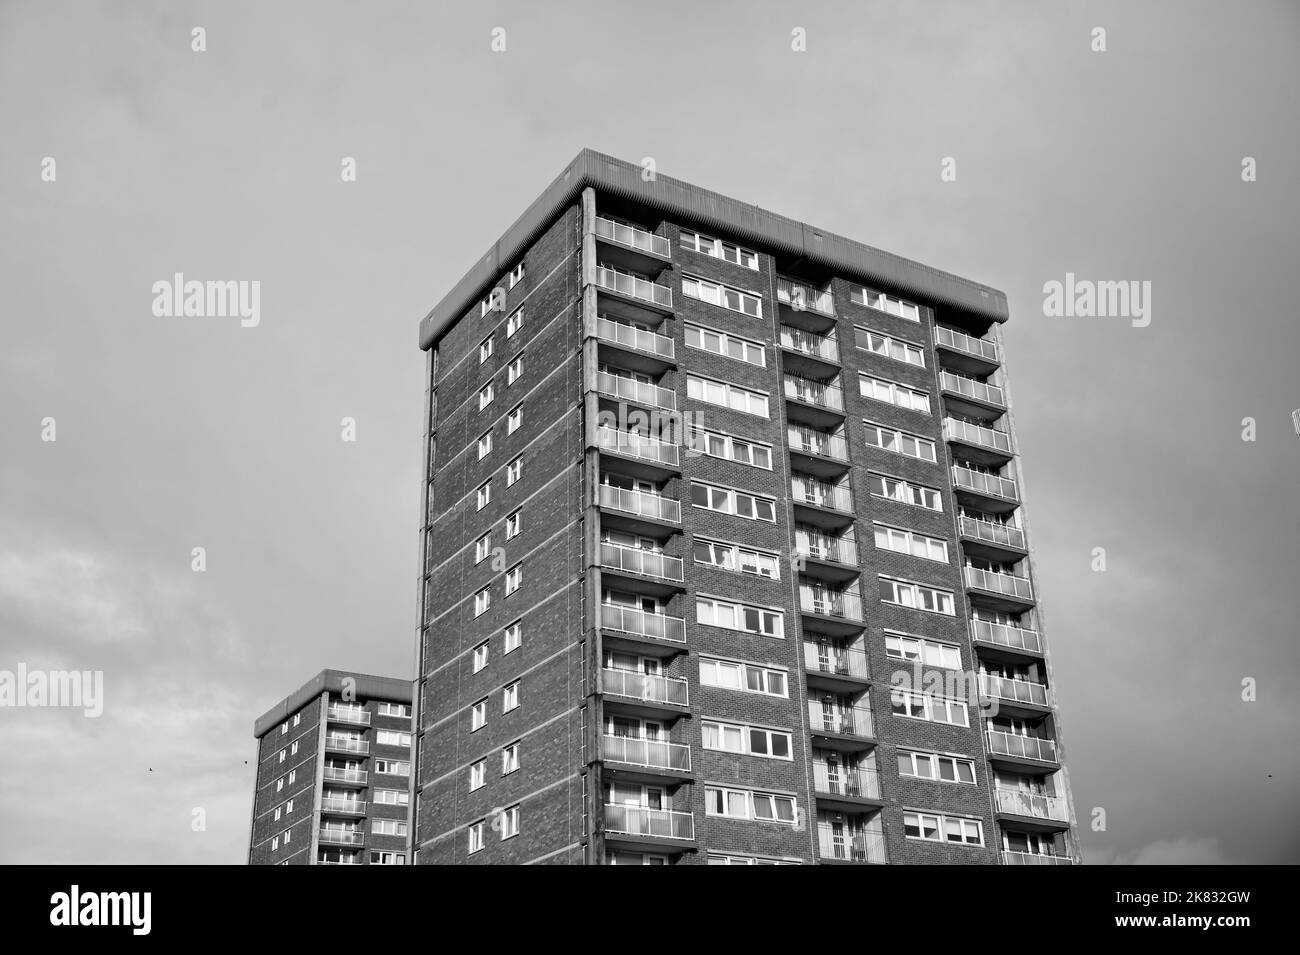 Council flats in poor housing estate with many social welfare issues in LInwood Stock Photo